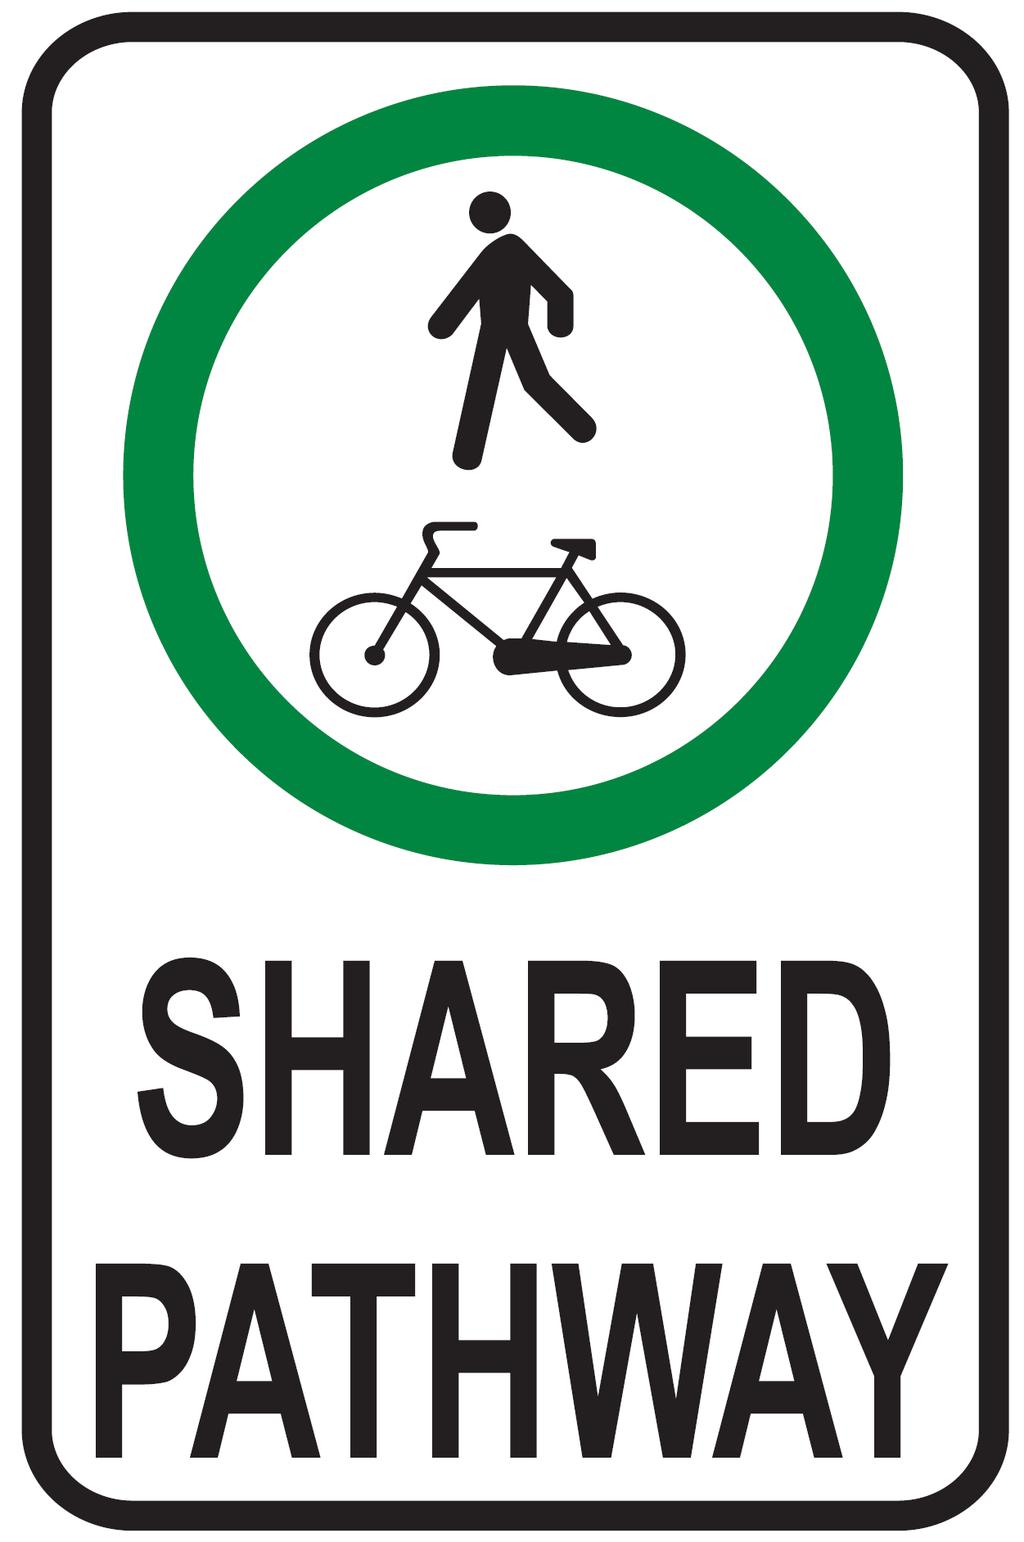 General traffic principles apply on multi-use trails keep to the right as appropriate for a two-way transportation facility, and slower users